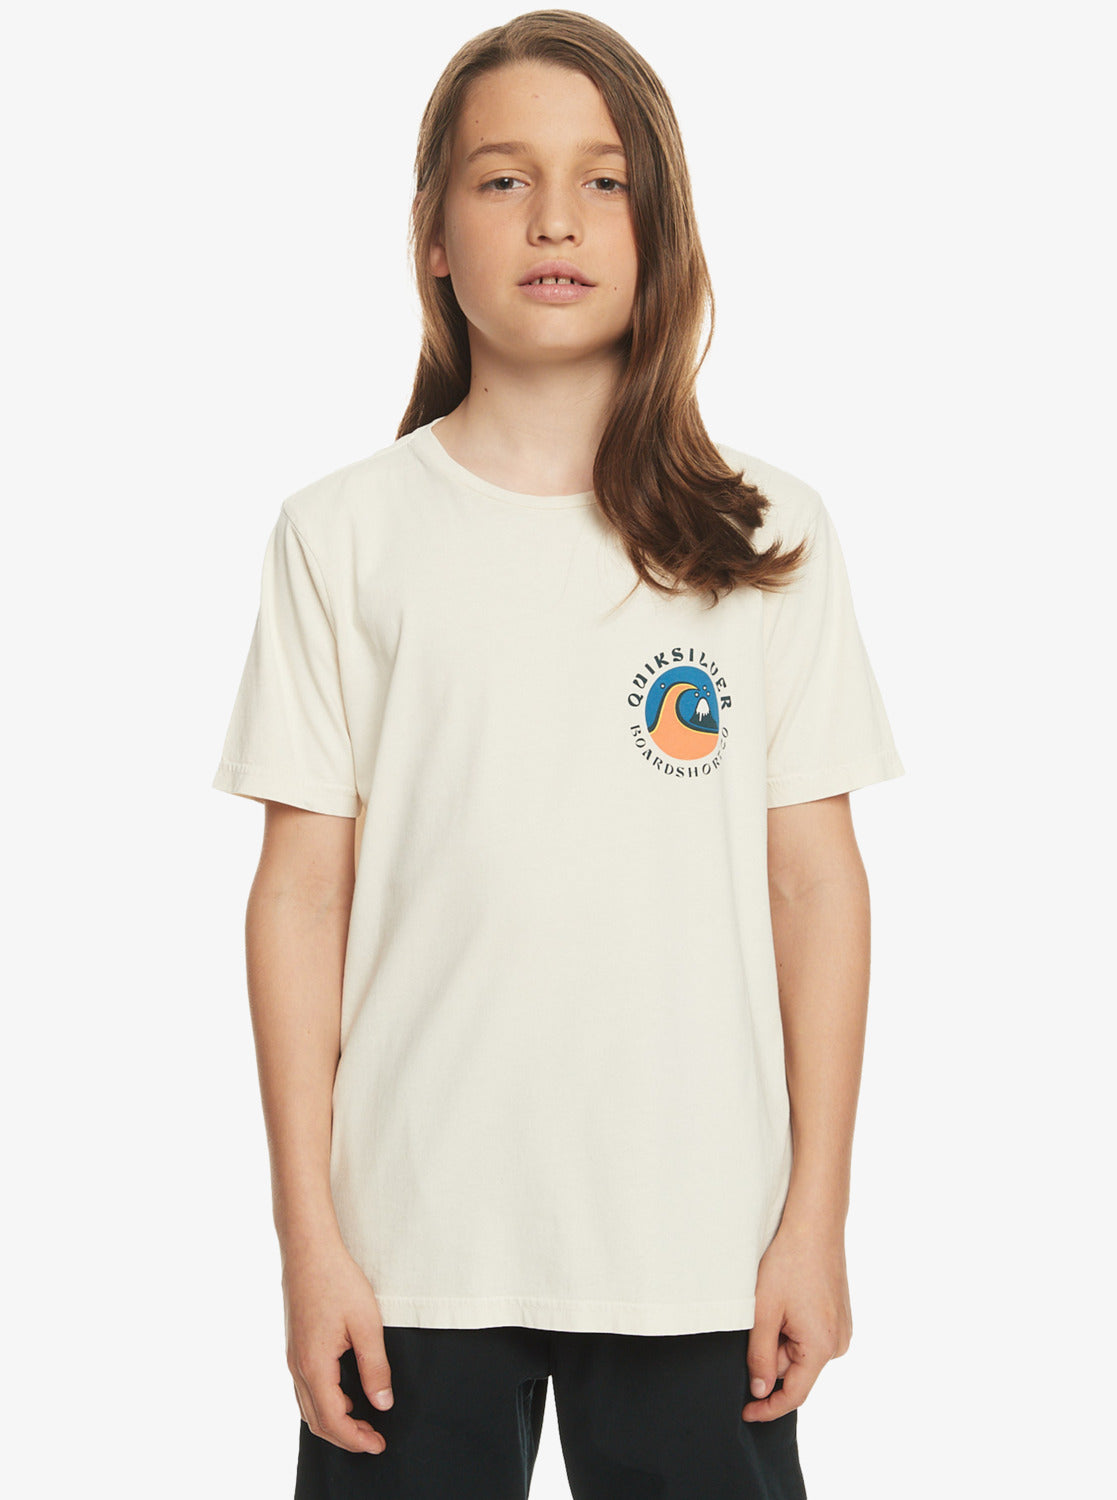 Quiksilver Bubble Stamp SS Tee.